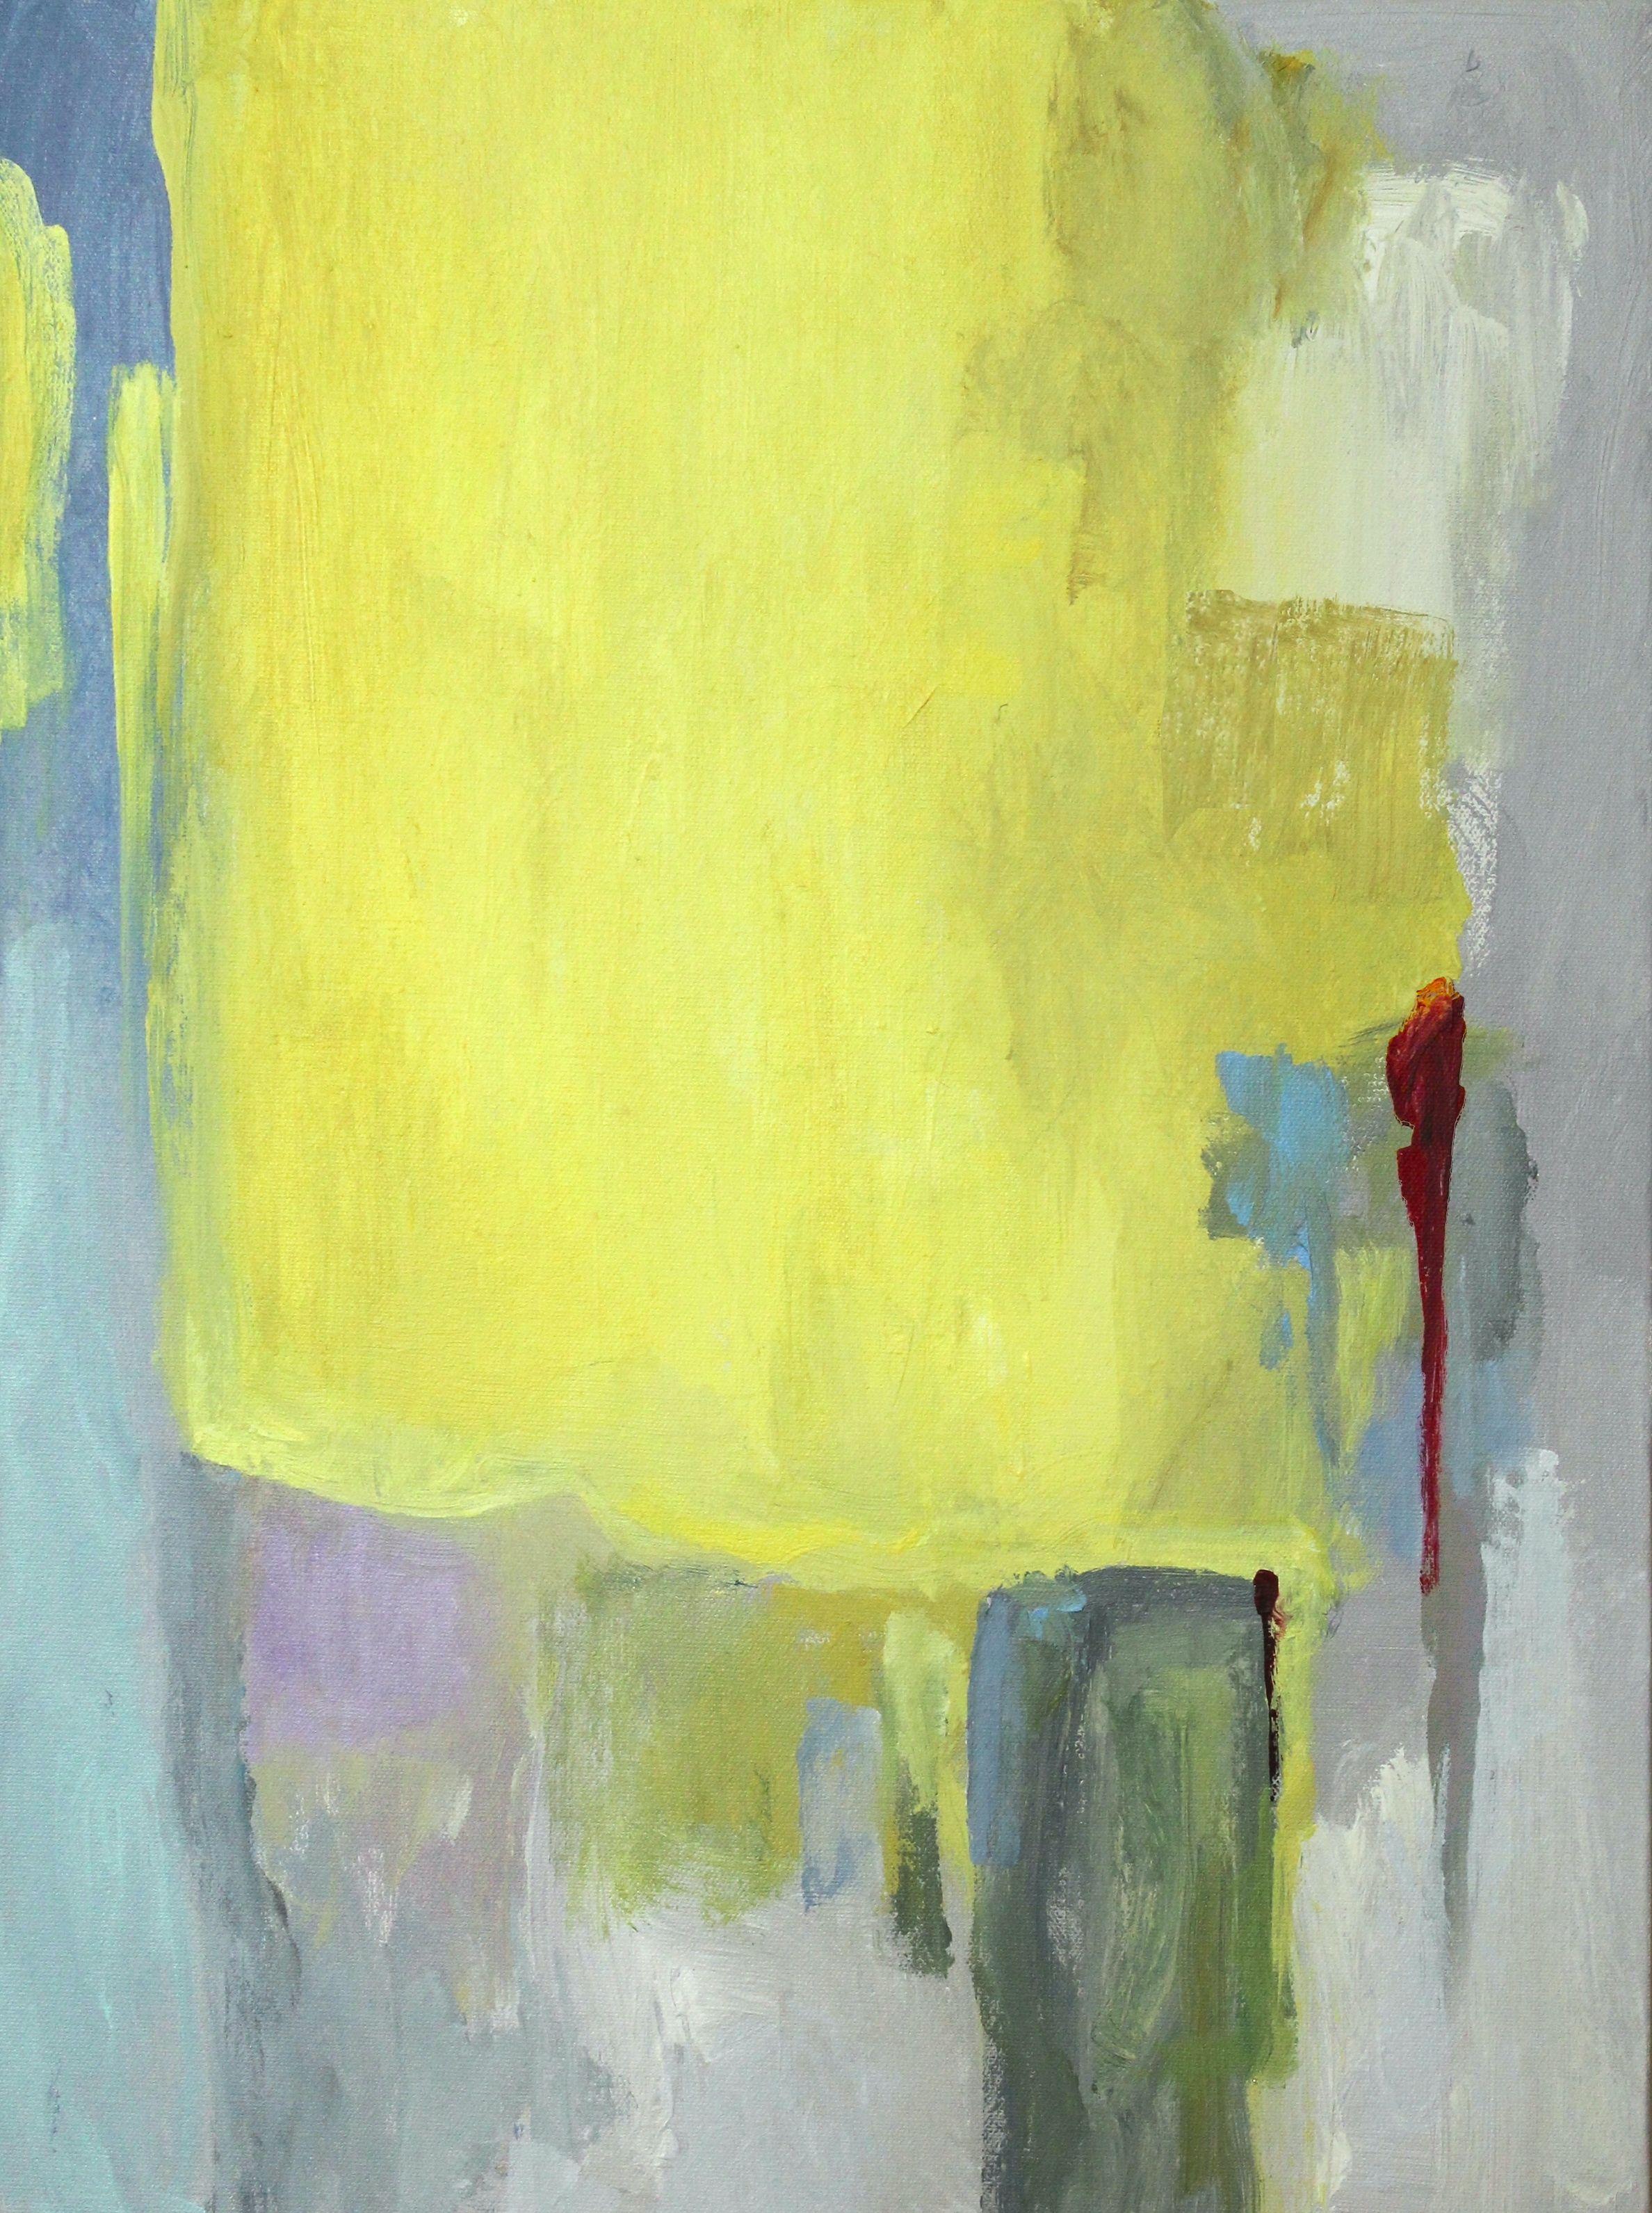 This is "Urban Yellow", expression of color, shape, emotional output and impressions. Original abstract acrylic painting on Gallery wrapped canvas. This painting measures 24x18 x1.5 inches. The sides are painted white and it will be shipped ready to